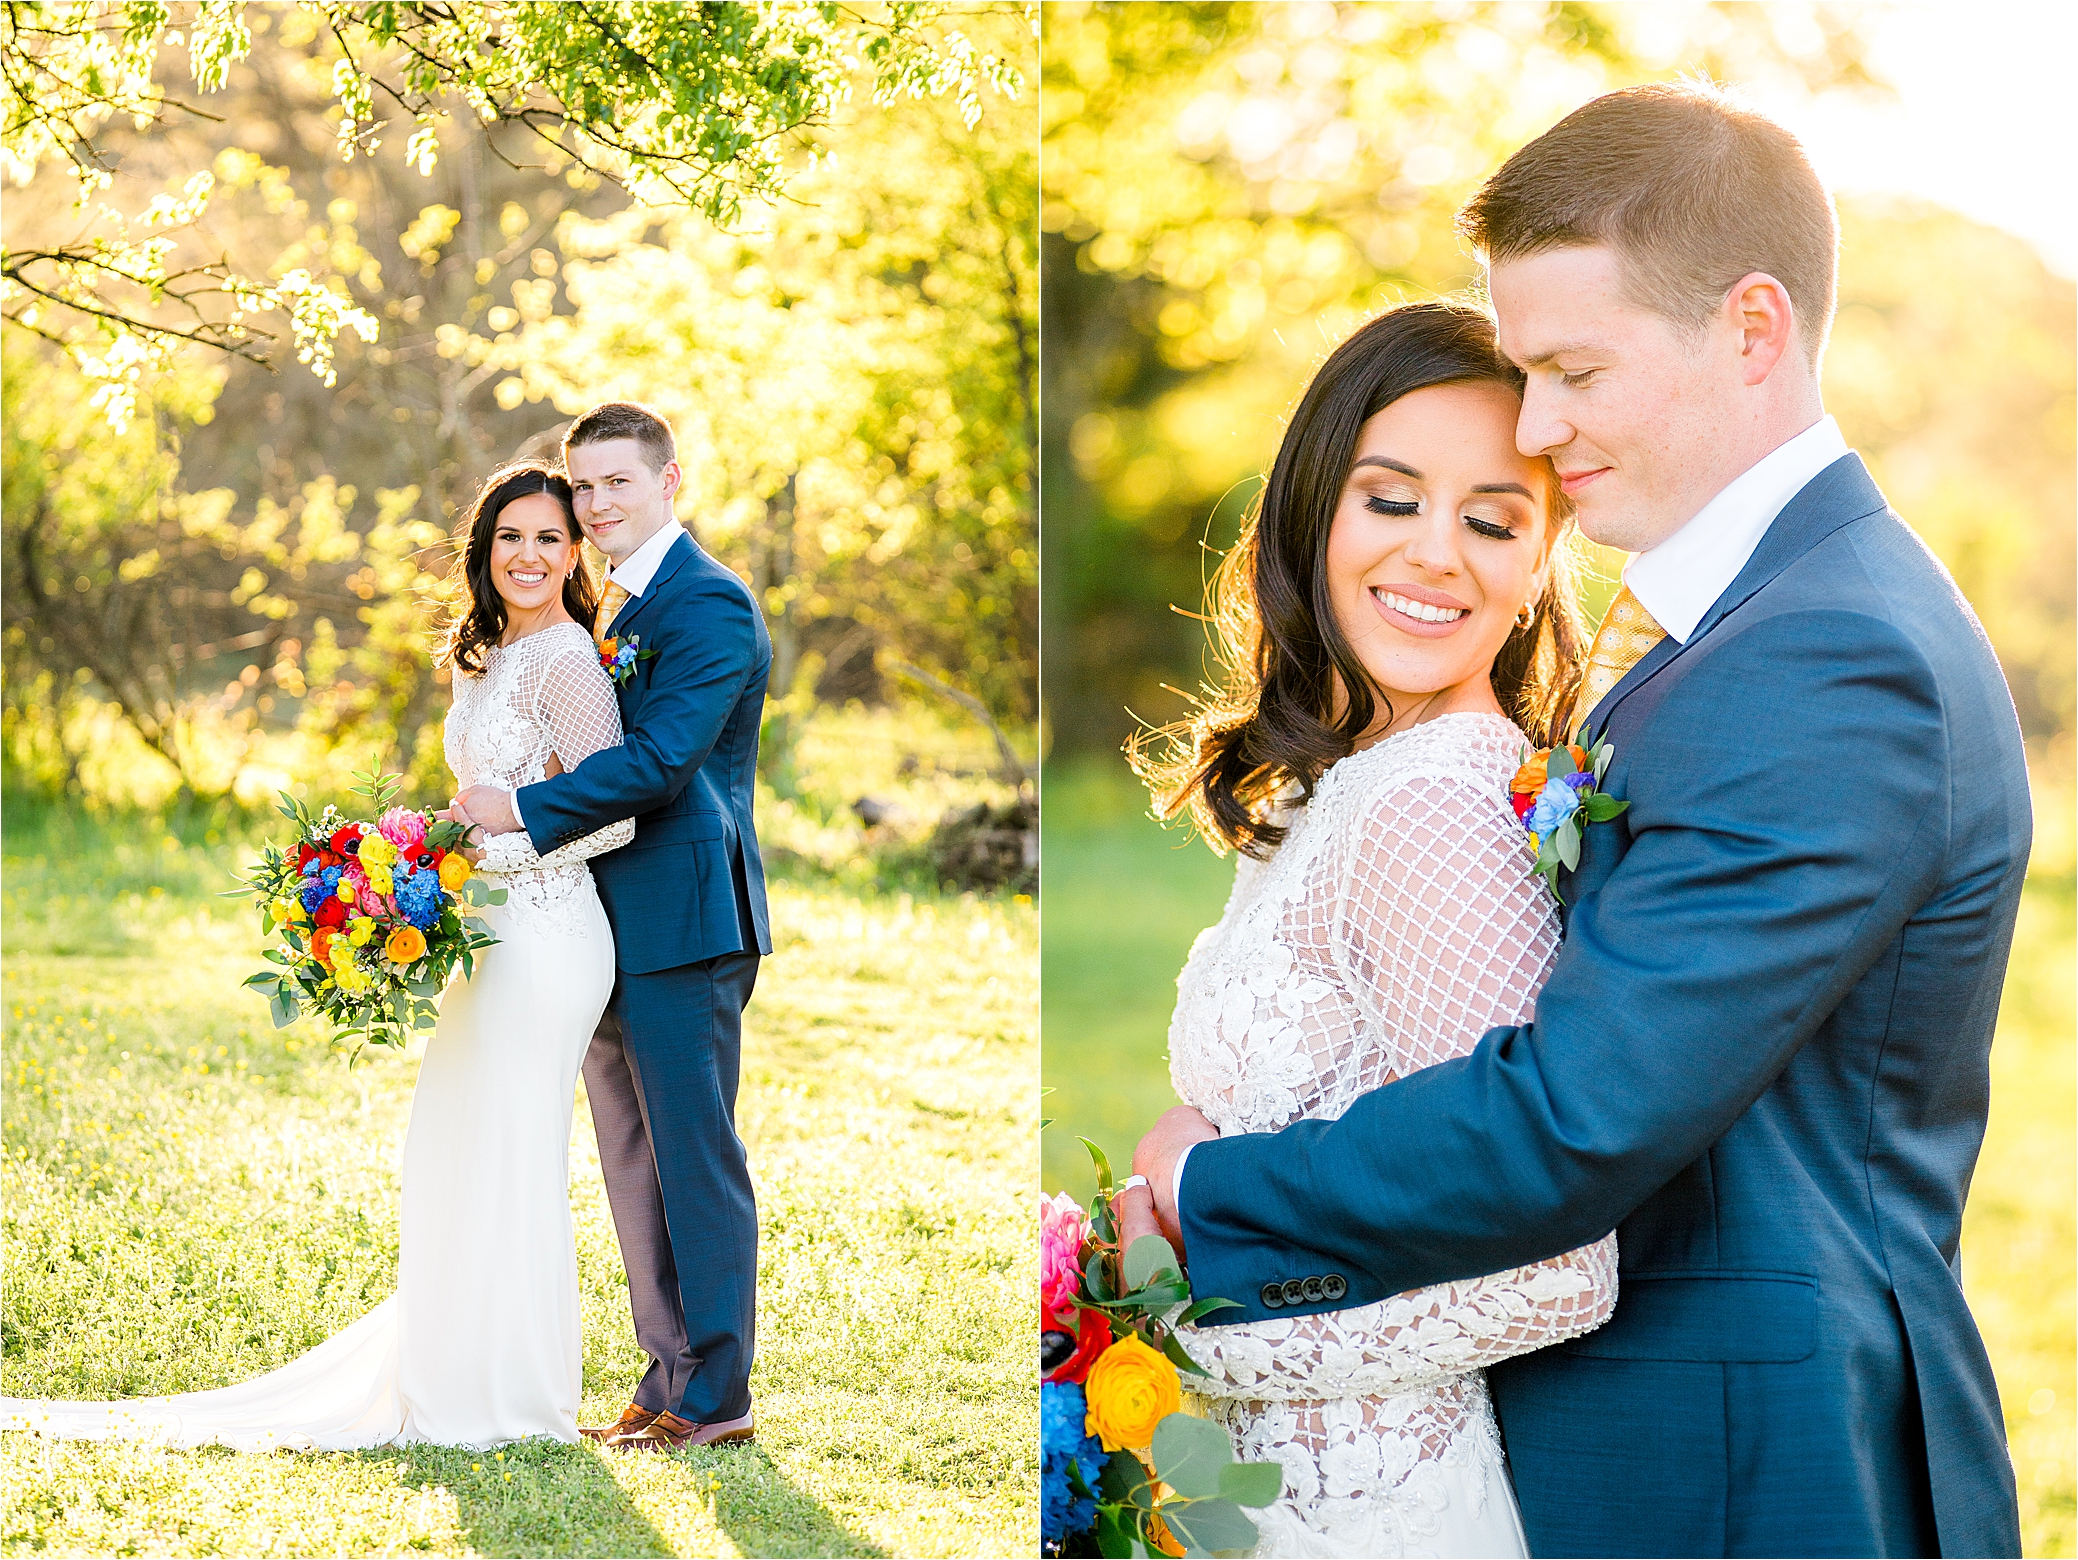 A groom embraces his wife during their outdoor, sunset wedding portraits at PIneway Farms 